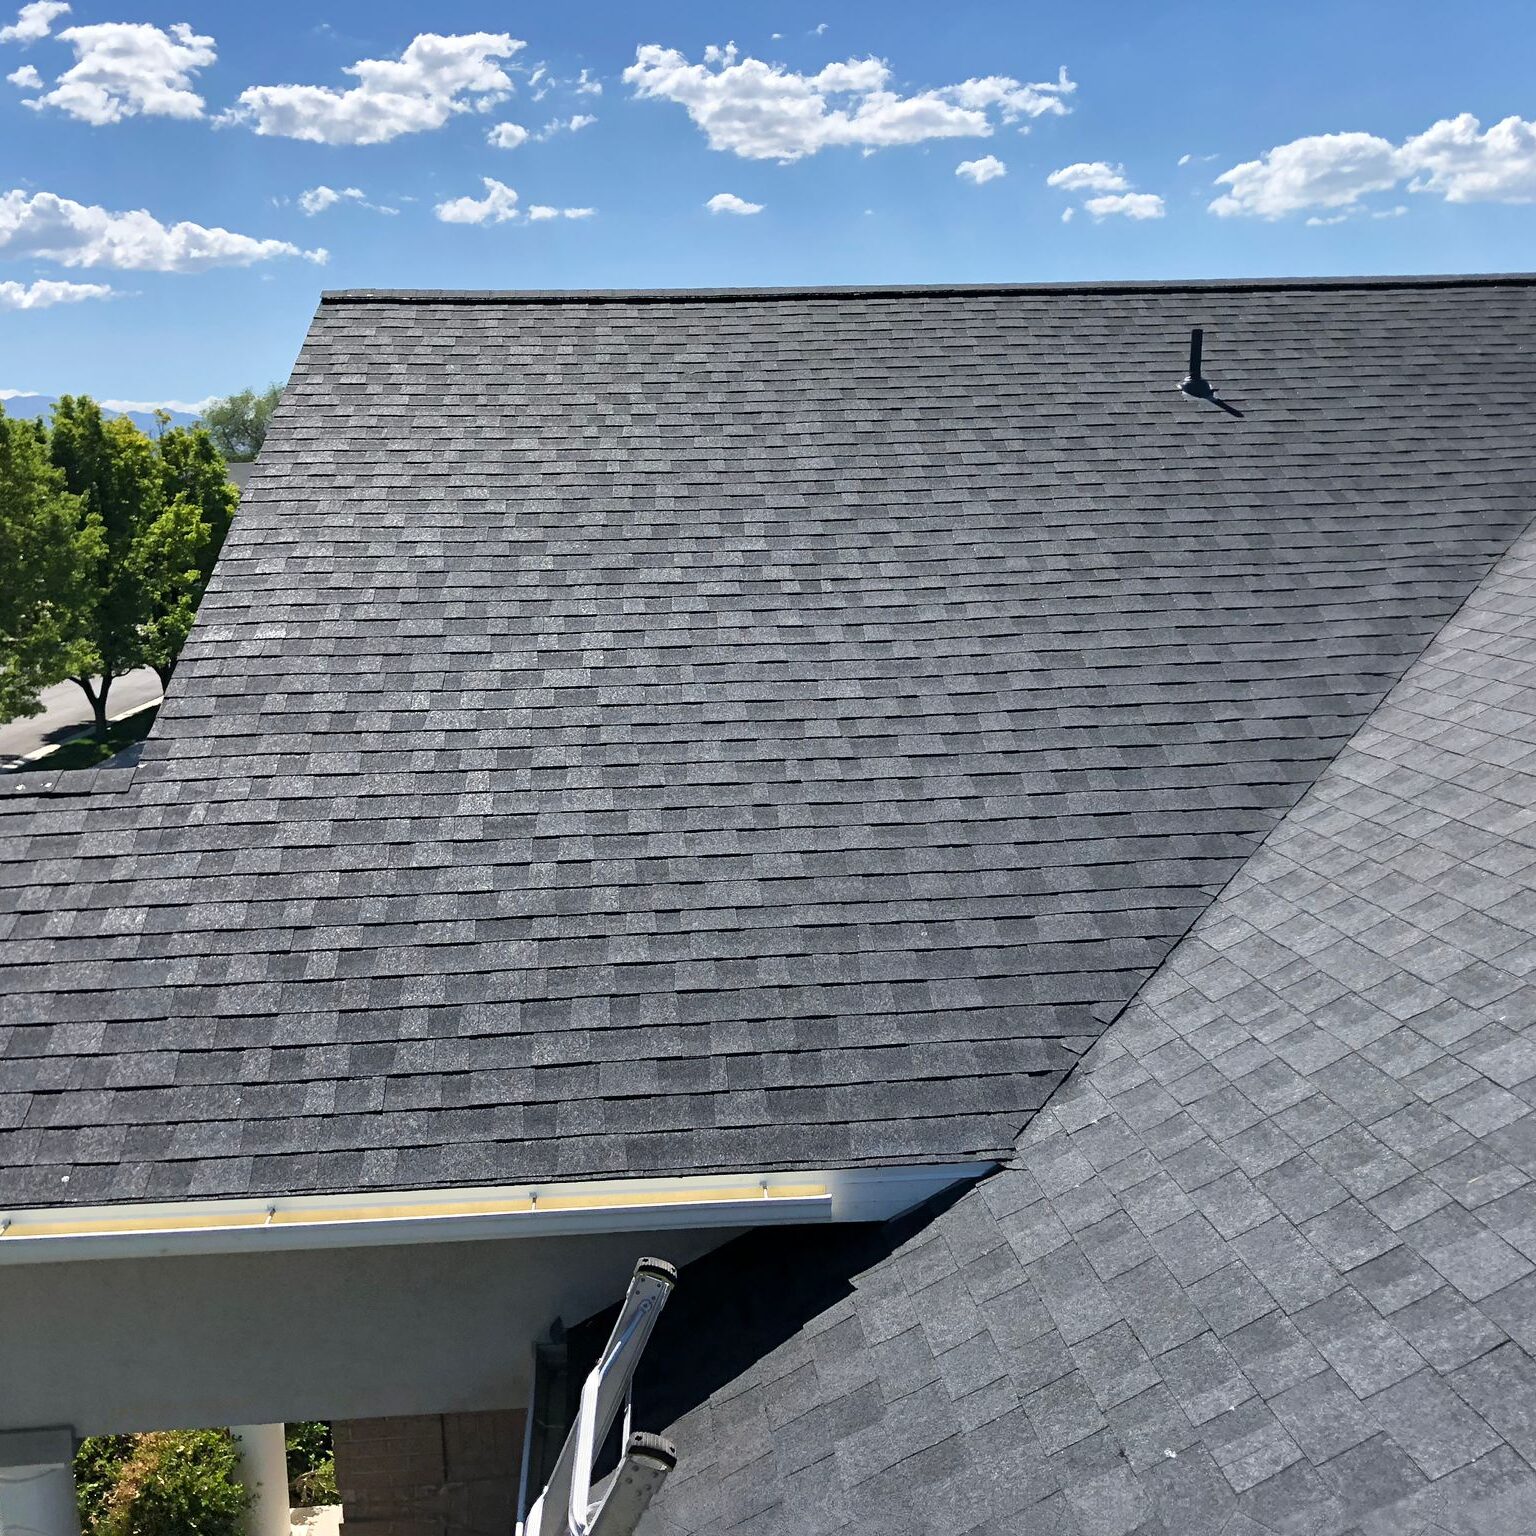 new roof replacement by Utah's roofing experts at Intermountain West Contractors